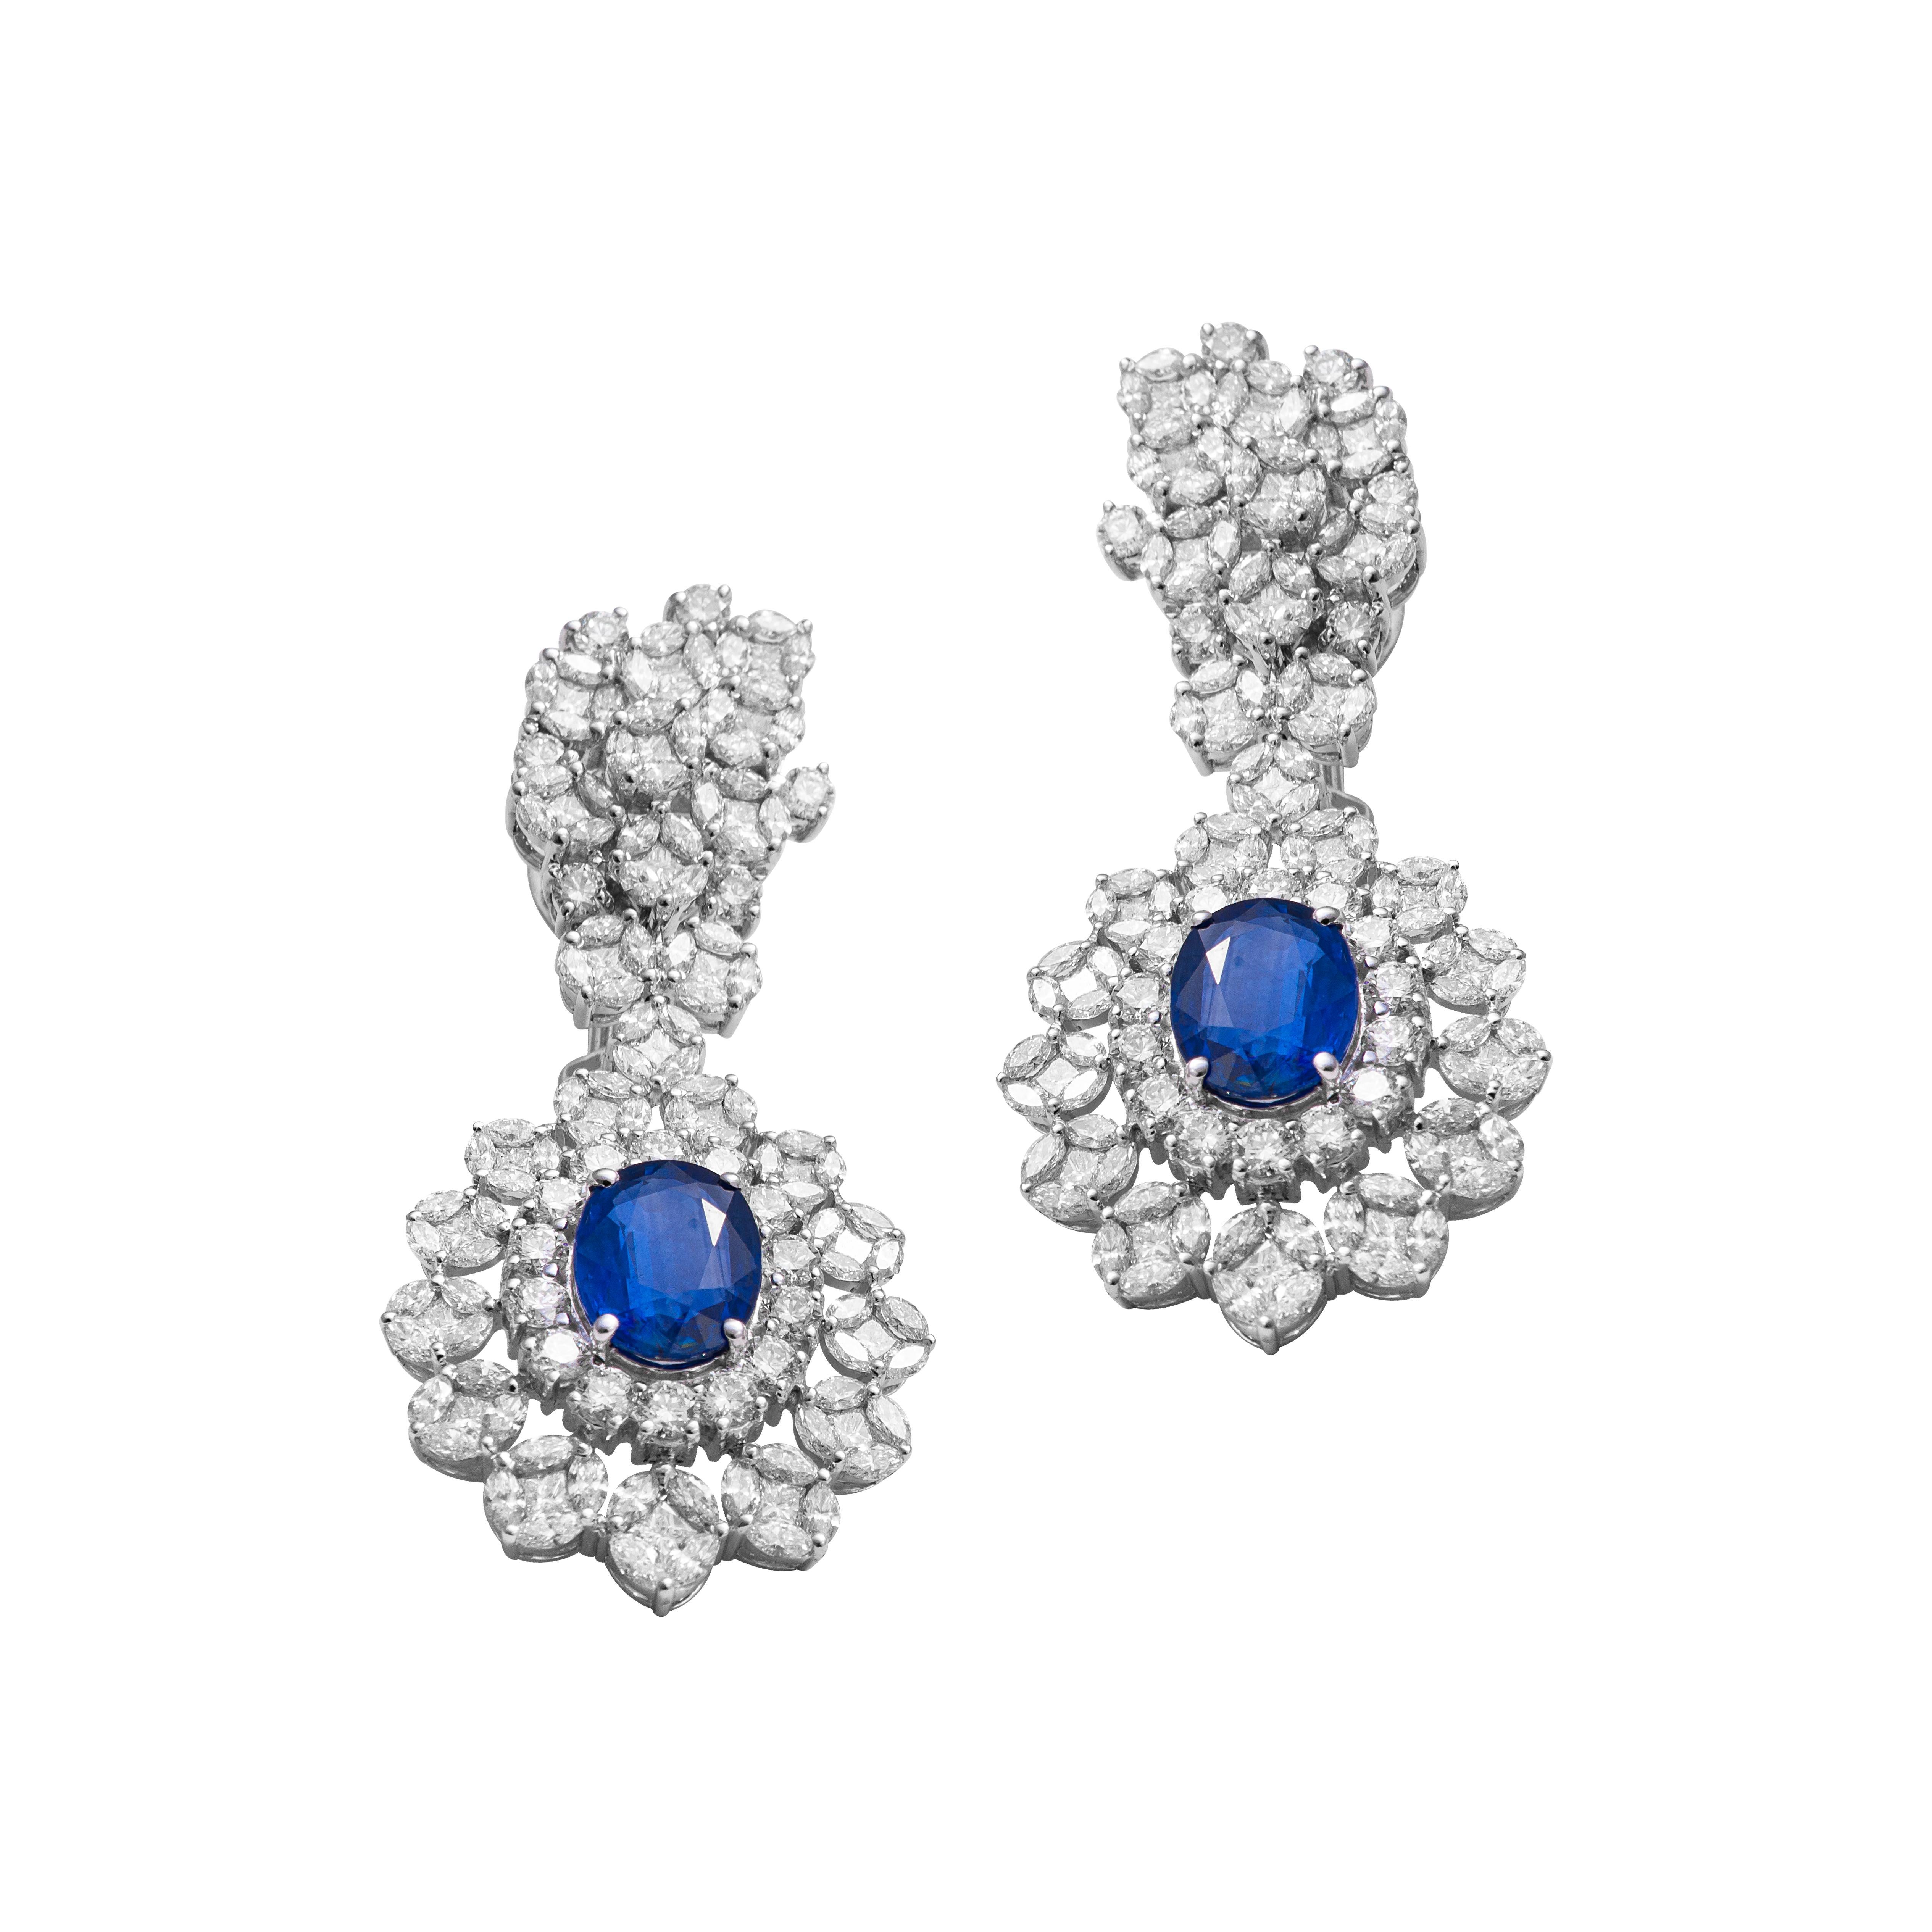 18 Karat White Gold Diamond And Blue Sapphire Bridal Necklace Set 

Beautifully crafted, this exquisite bridal necklace with earrings is set on 18 karat white gold and studded with VVS quality diamonds and royal blue sapphires. The opulence and